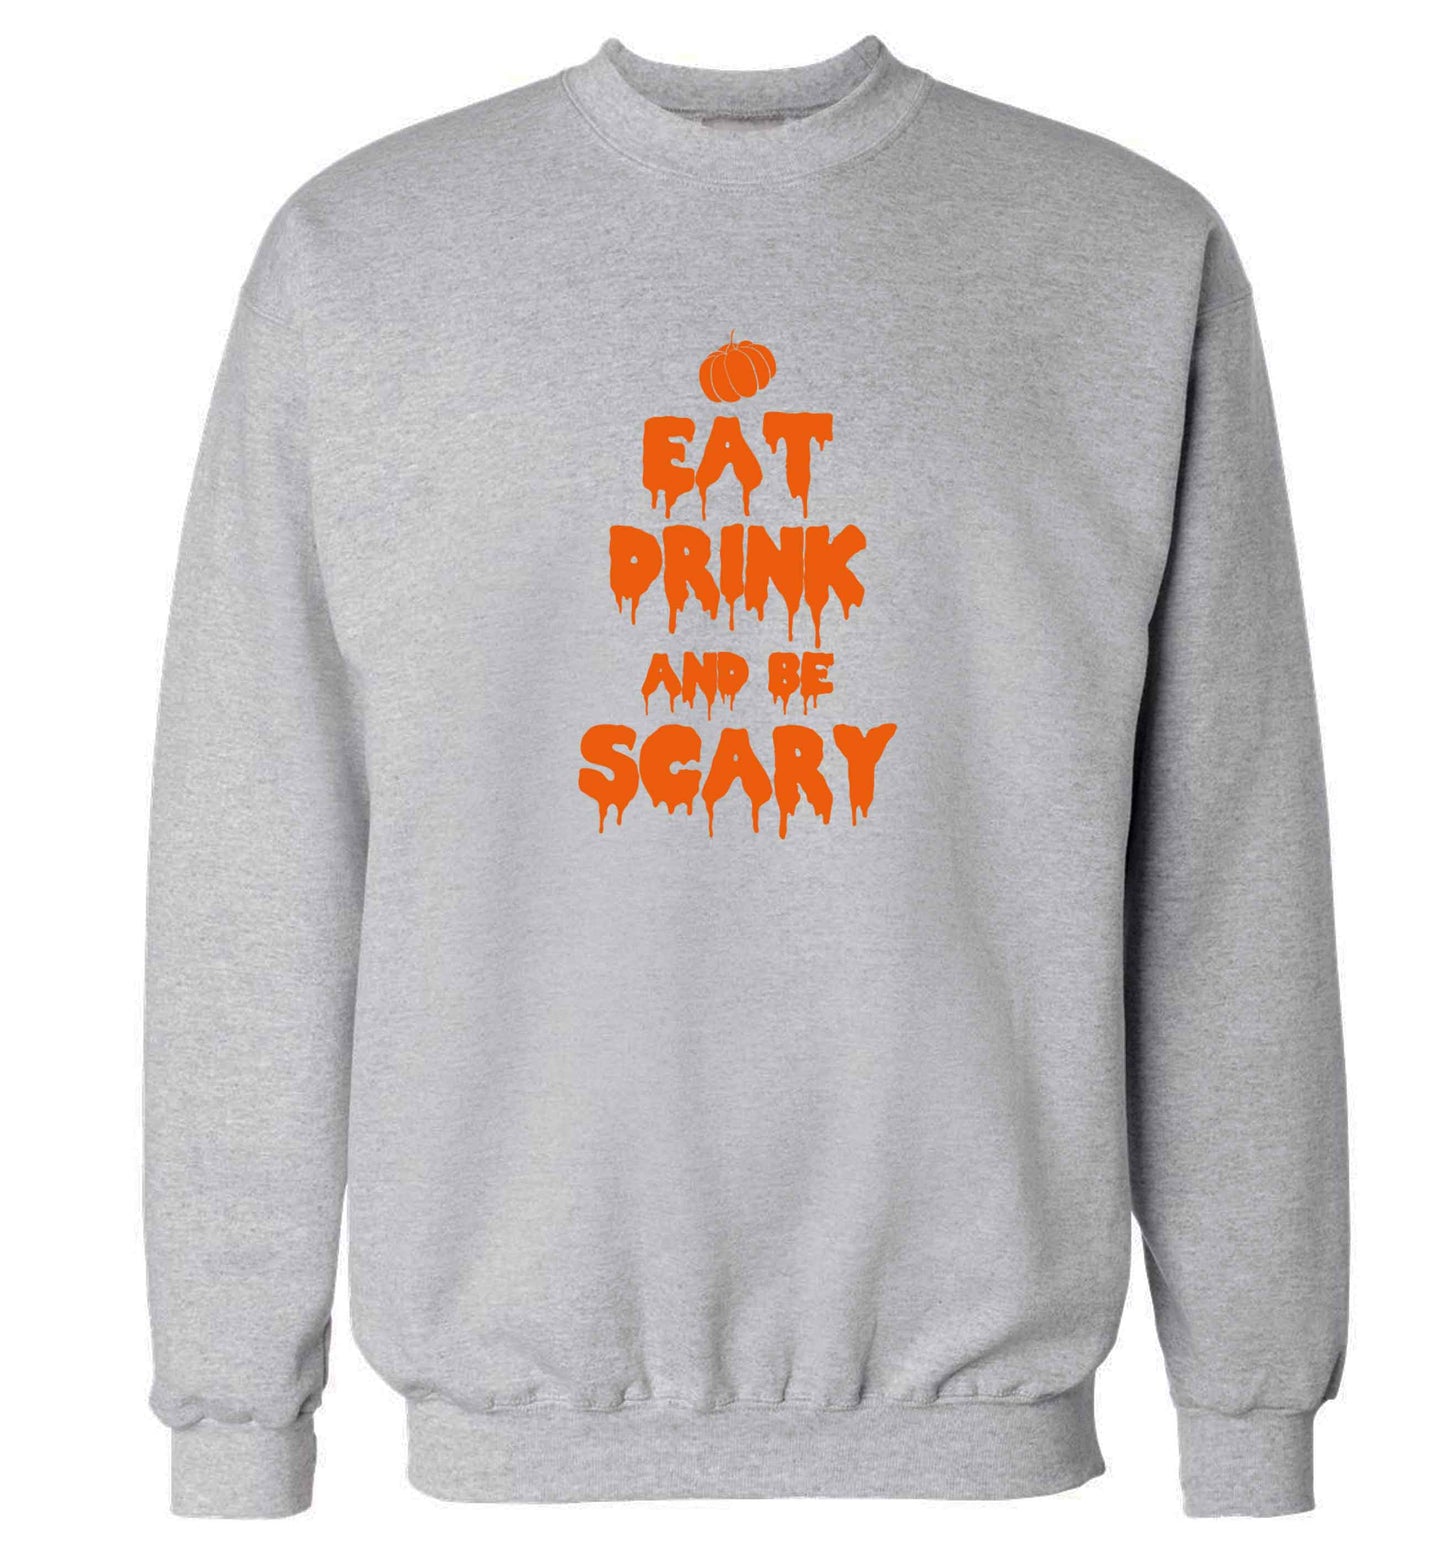 Eat drink and be scary adult's unisex grey sweater 2XL